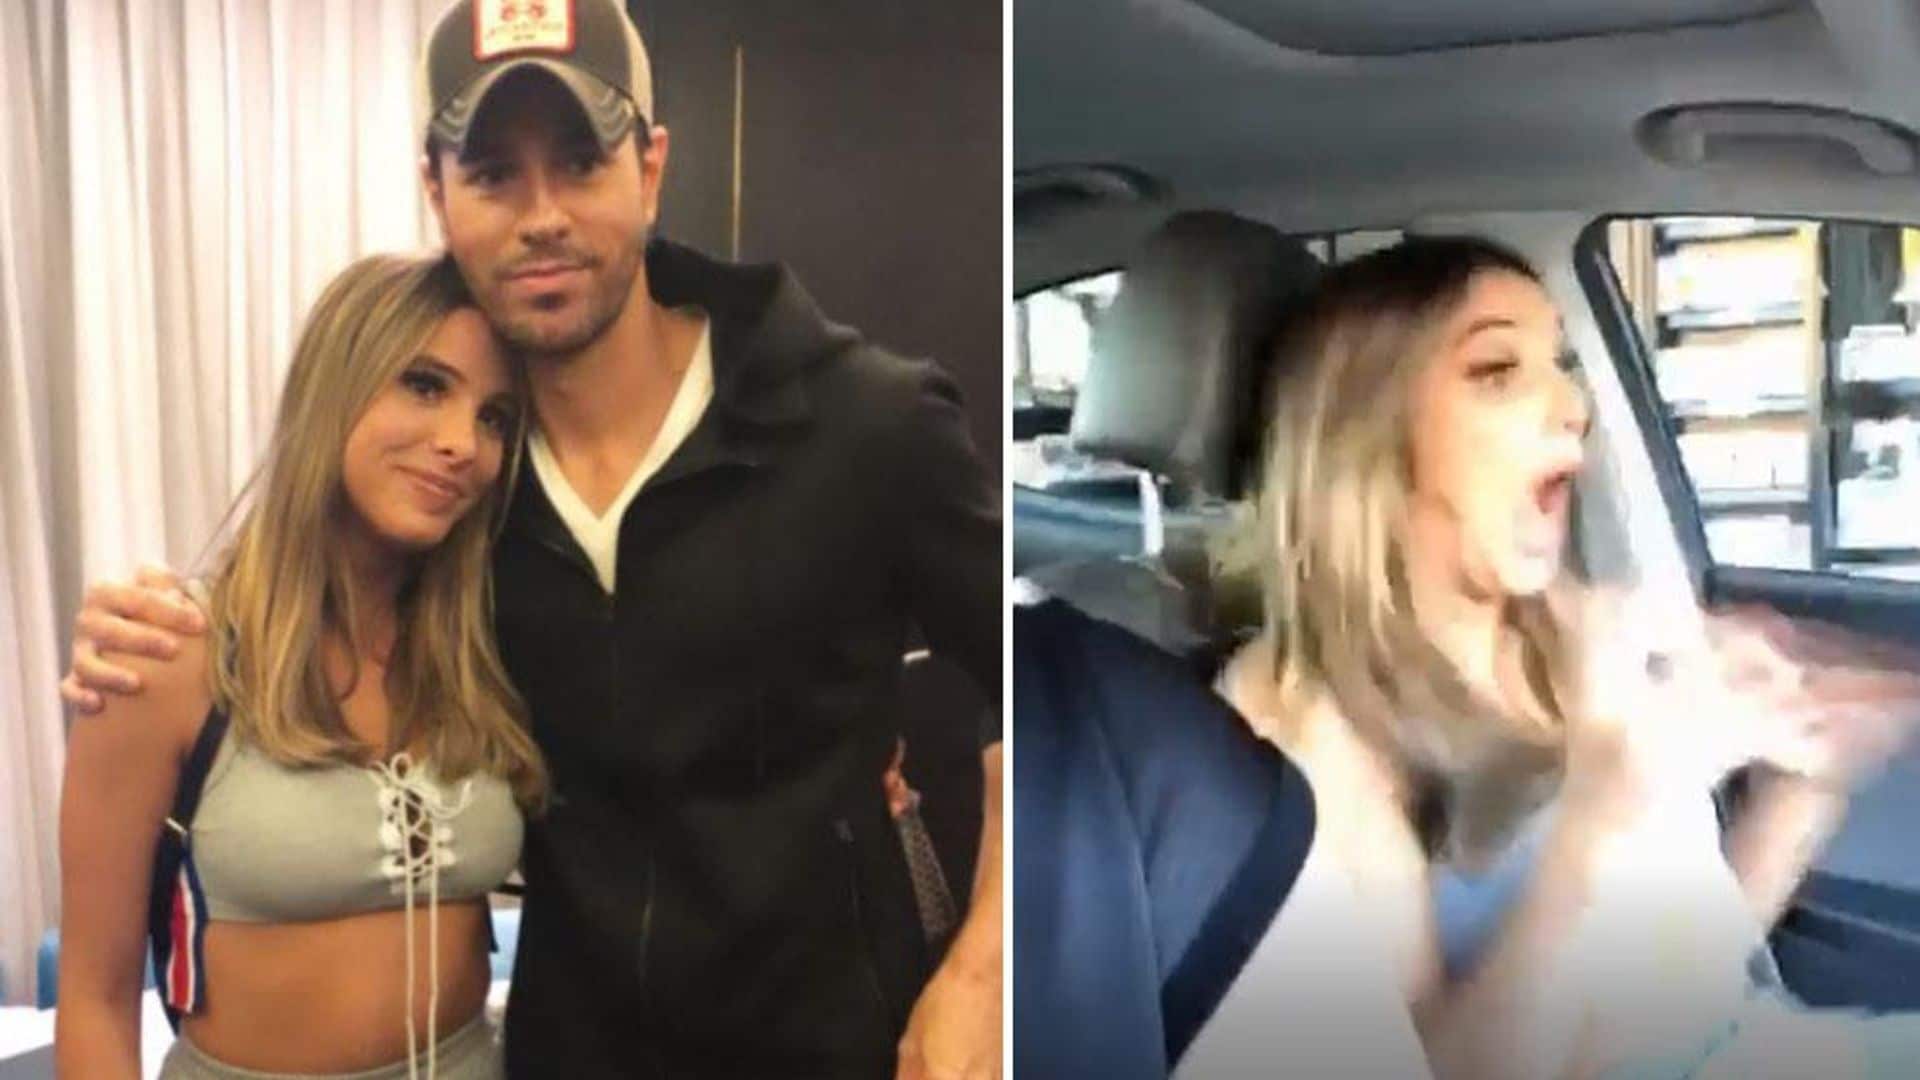 Lele Pons met her idol Enrique Iglesias wearing a bikini crop top and her reaction to seeing him was priceless